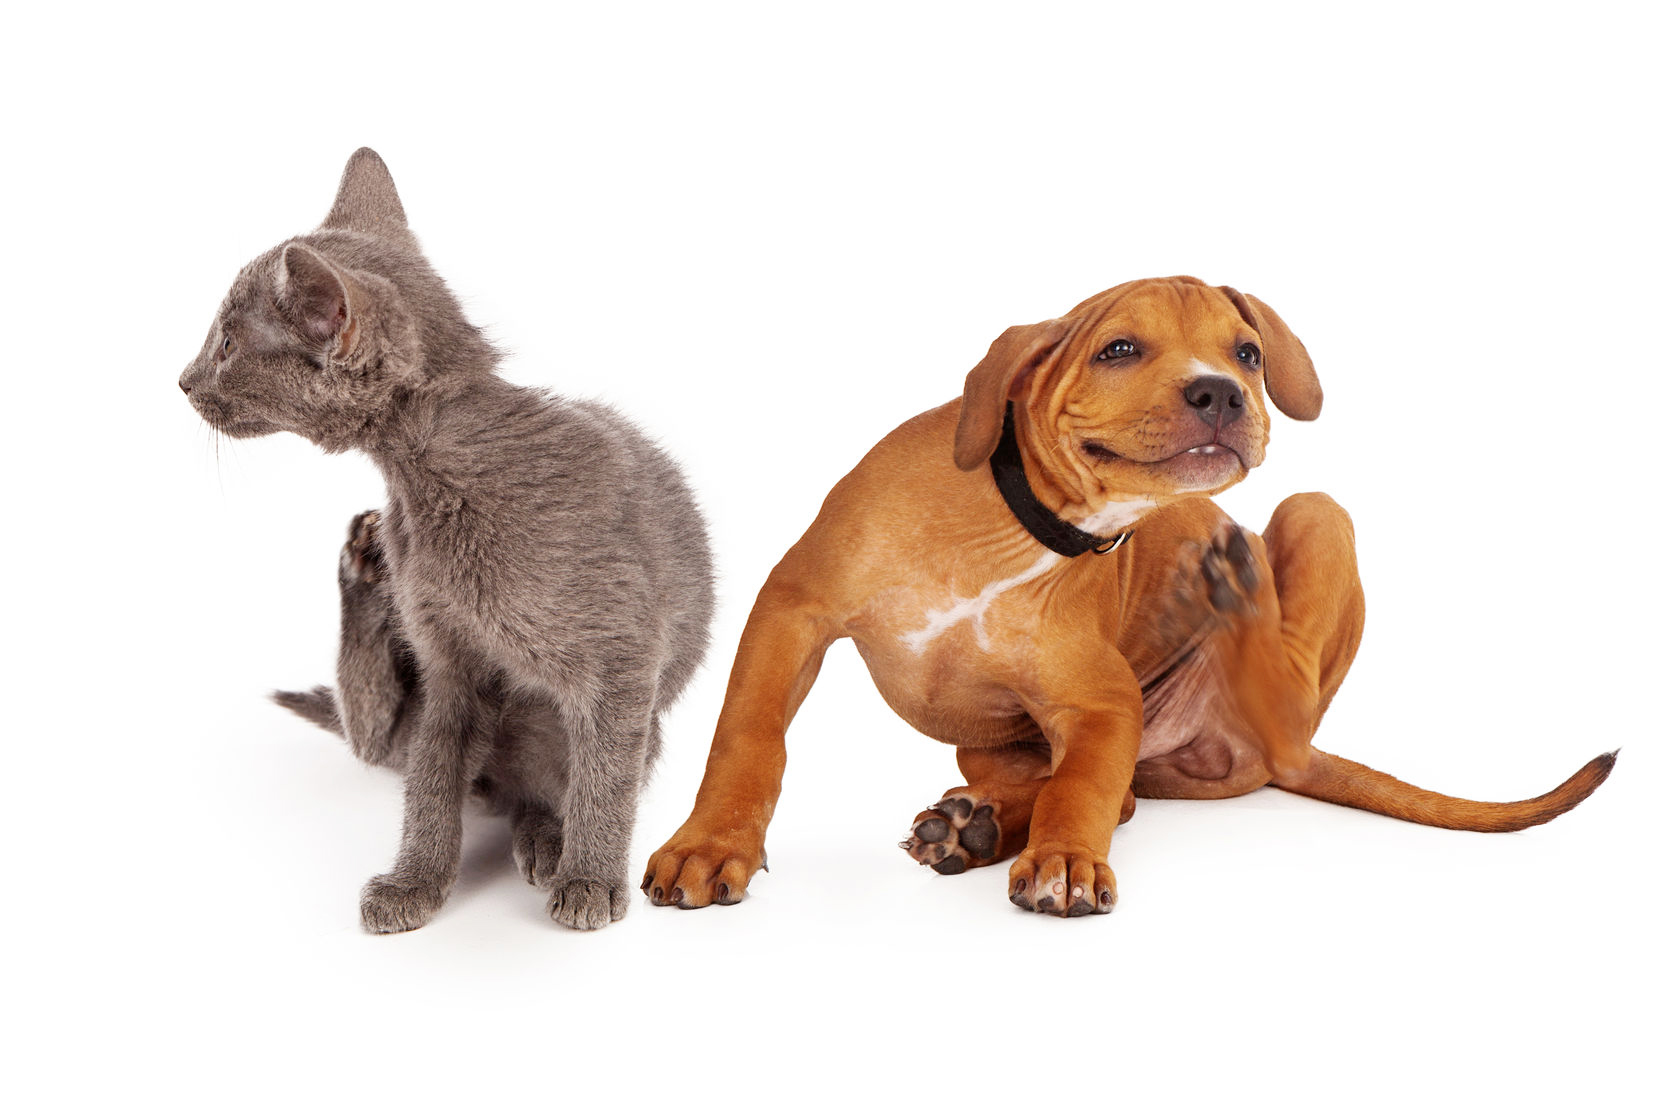 Don’t use your dog’s flea and tick medicine on your cat!